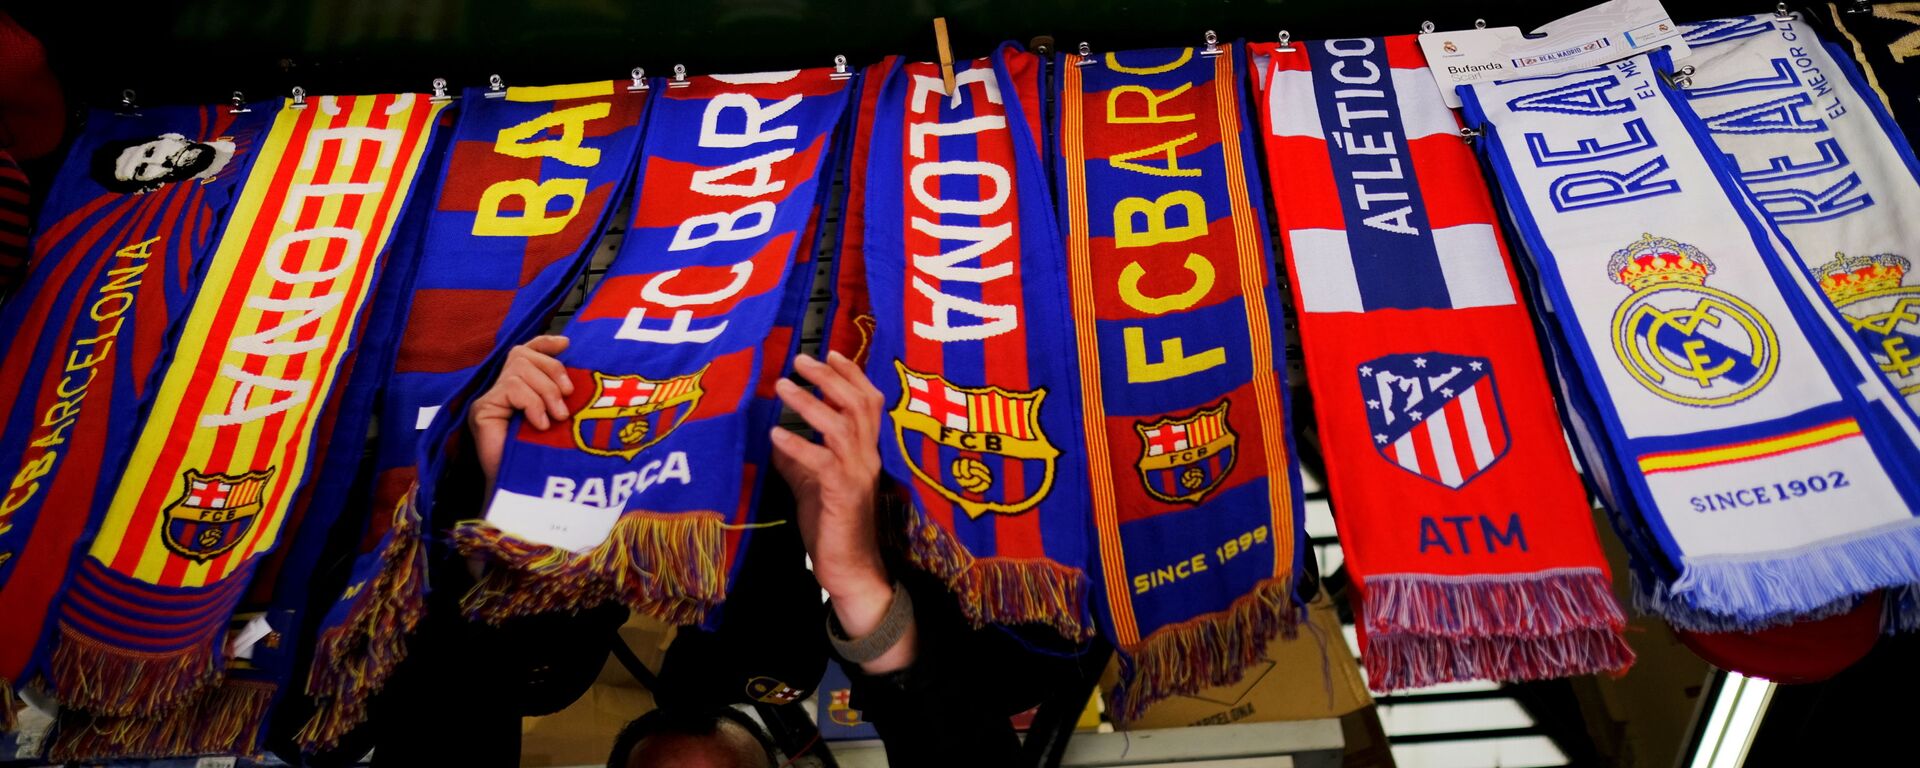 Soccer Football - FC Barcelona, Atletico Madrid and Real Madrid scarves are displayed inside a store at Las Ramblas as twelve of Europe's top football clubs launch a breakaway Super League - Barcelona, Spain - April 19, 2021 - اسپوتنیک افغانستان  , 1920, 31.05.2021